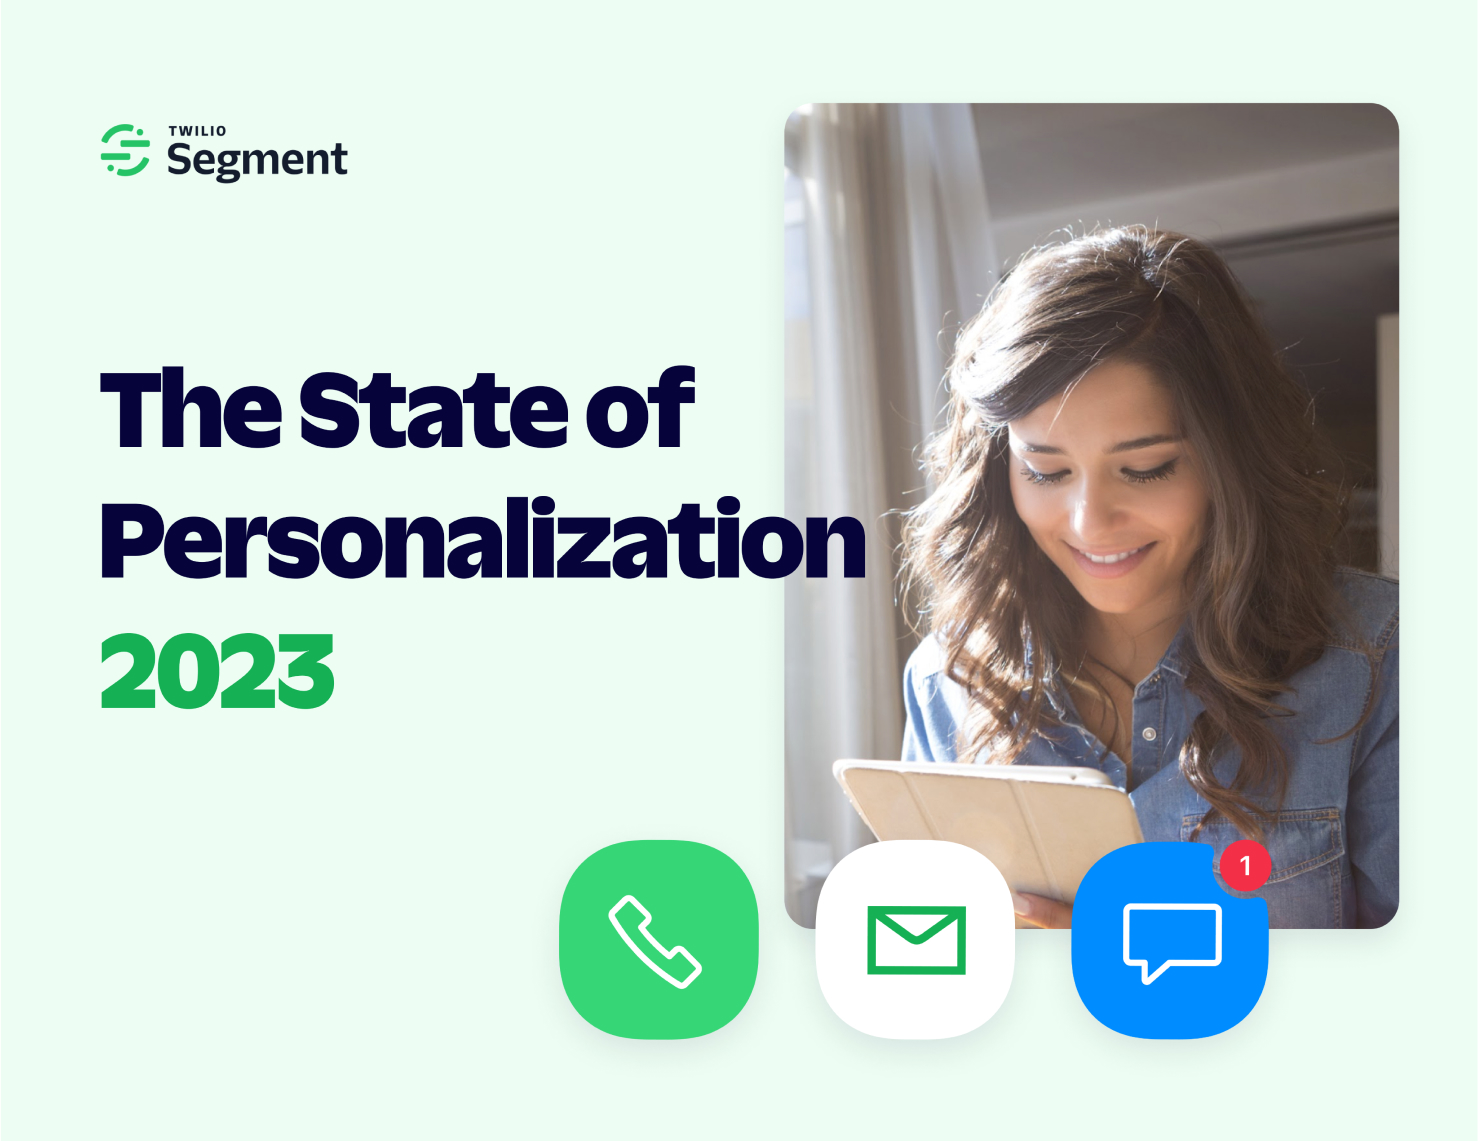 The state of personalization 2023